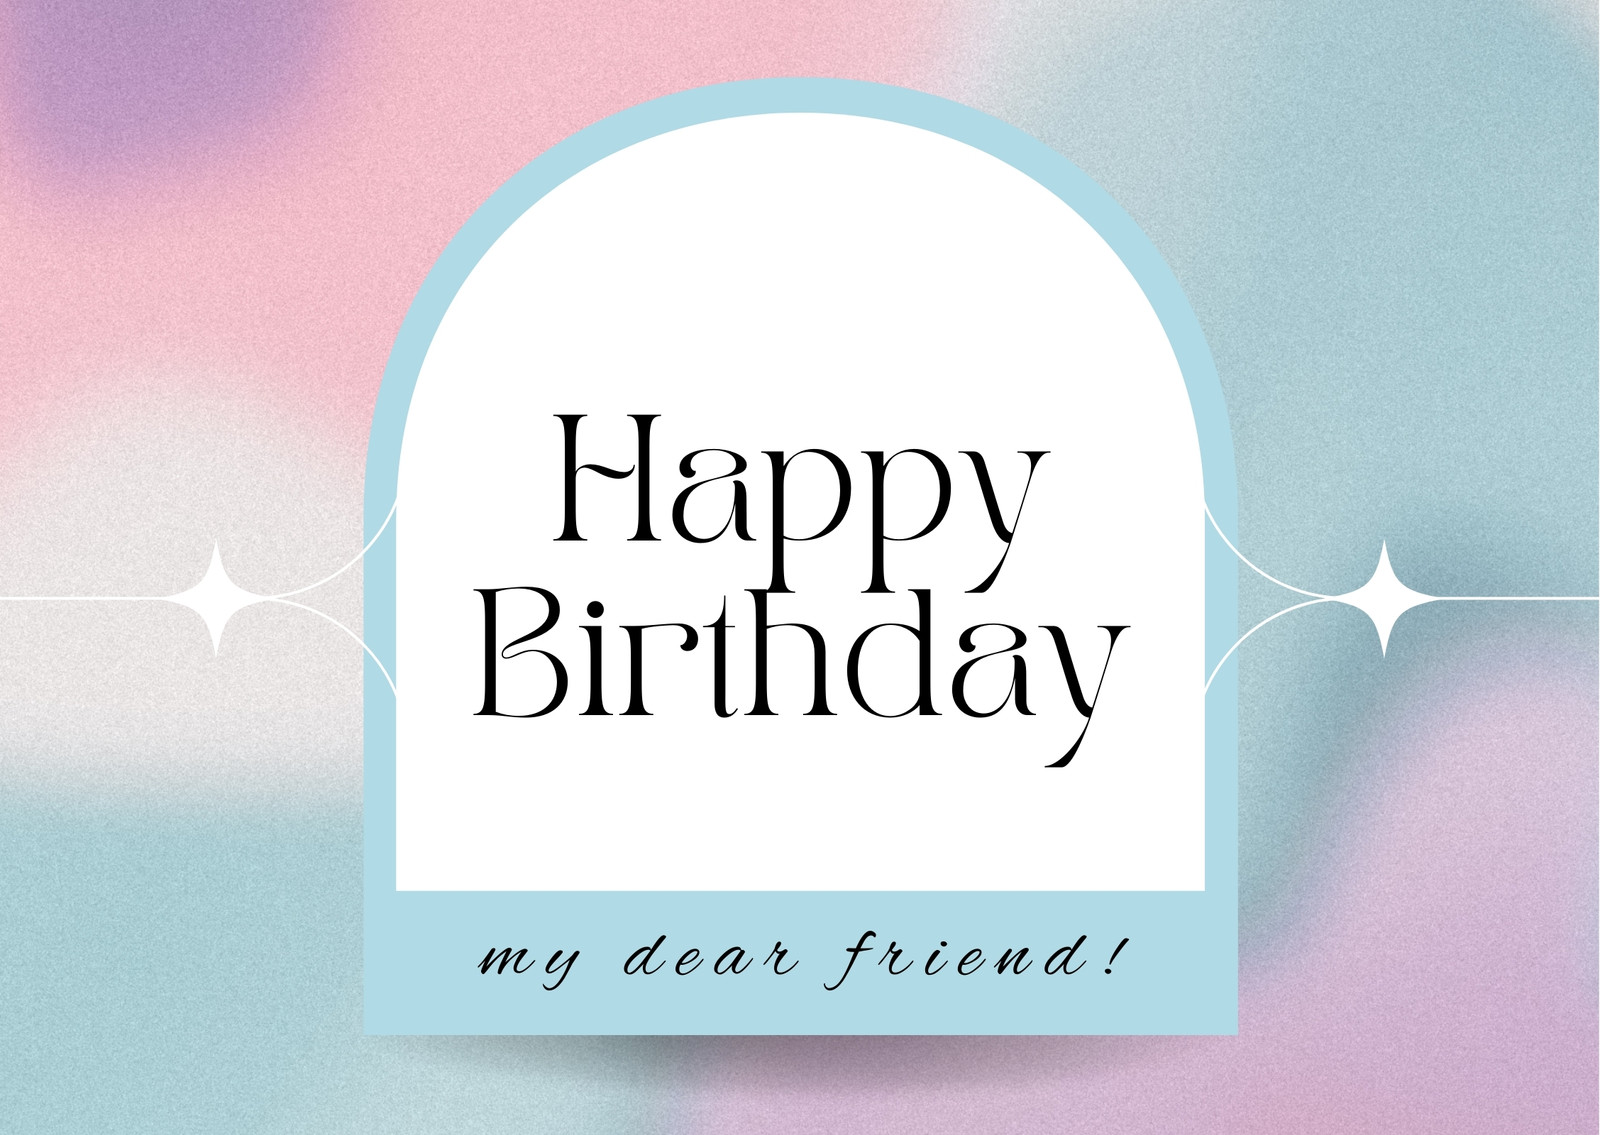 Happy Birthday Card with Name Adult Birthday Card Digital Birthday Card Virtual Birthday Card Kid Birthday Card Printable Birthday Card